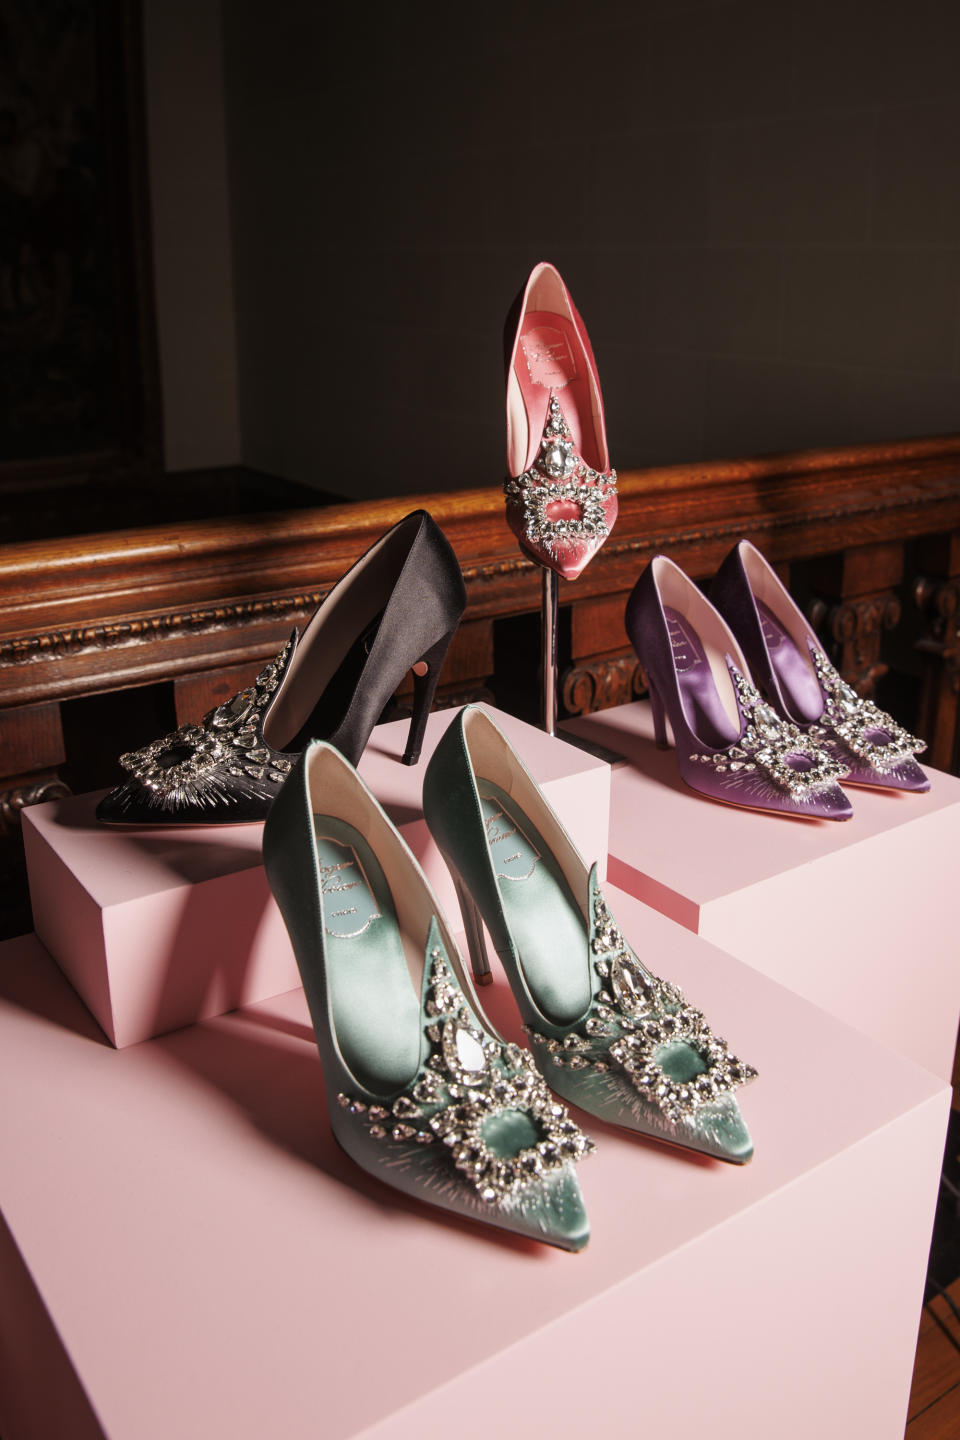 Styles from the Roger Vivier fall 2022 collection.